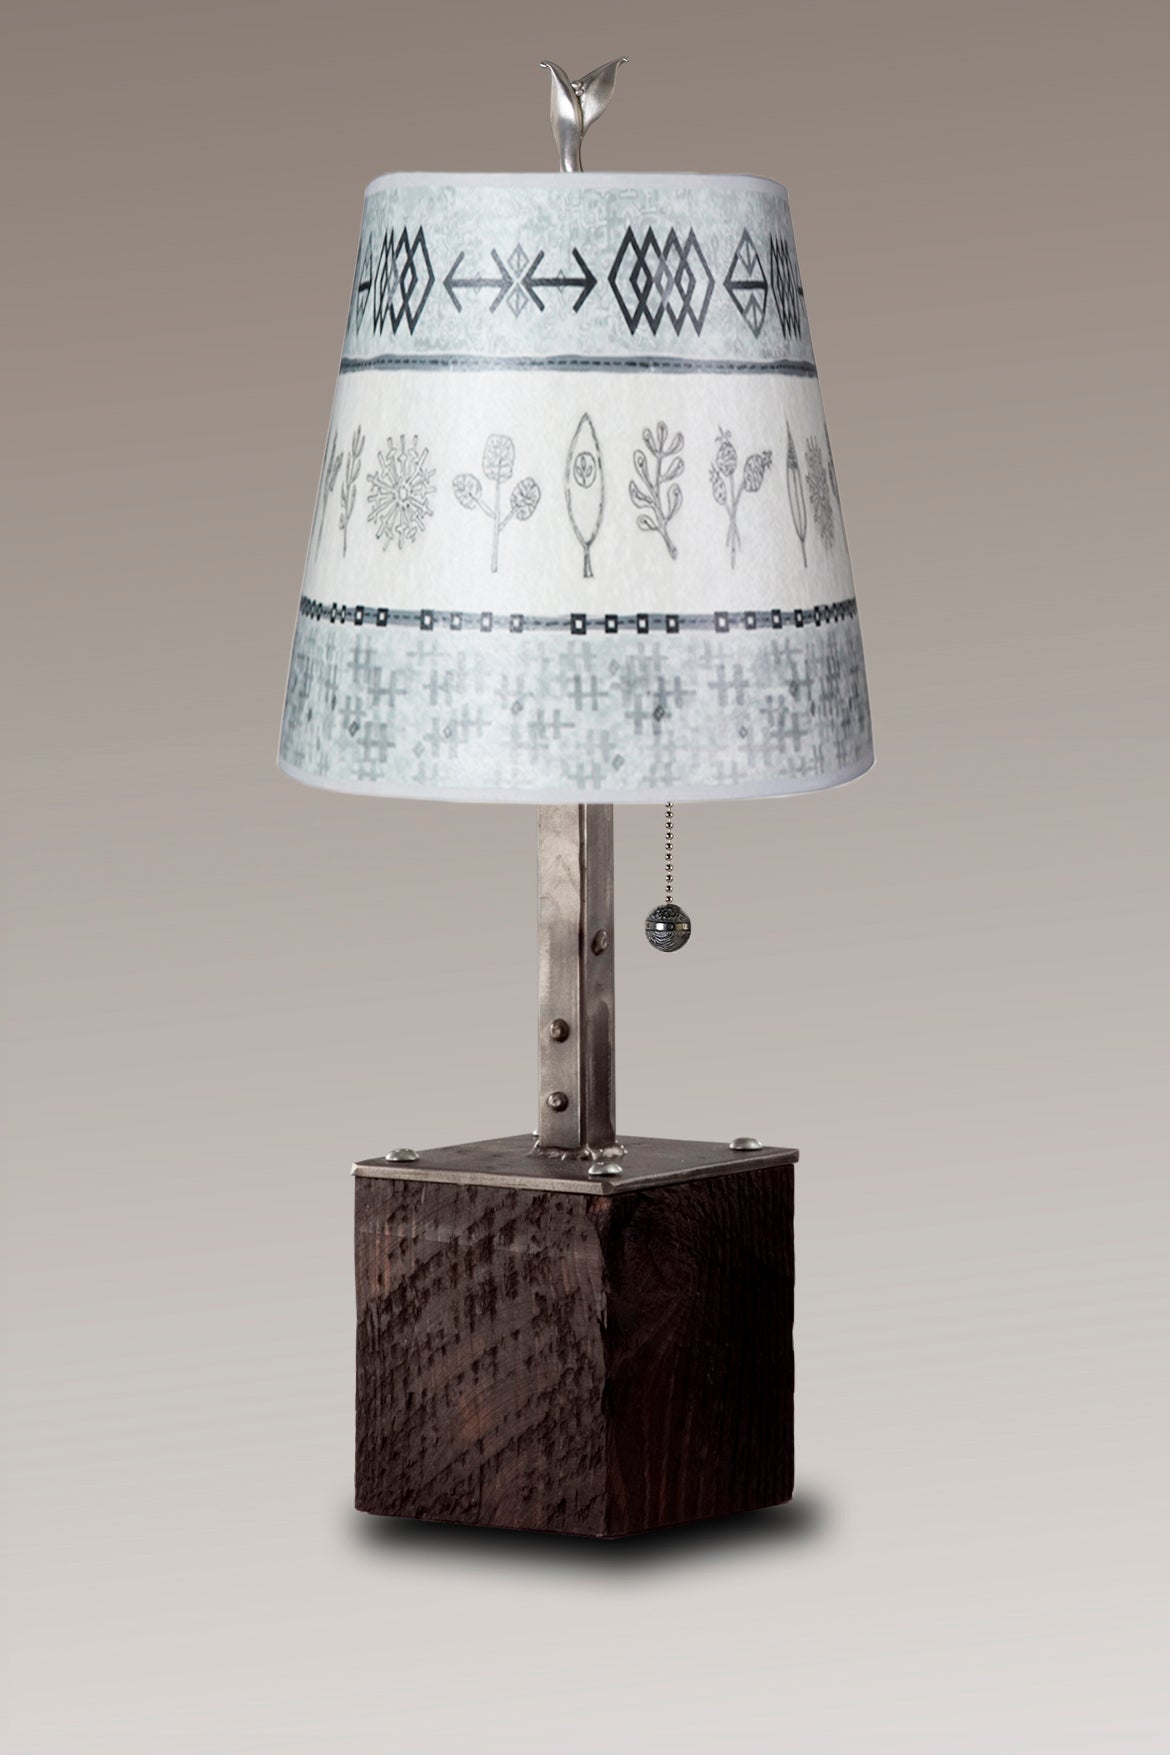 Janna Ugone & Co Table Lamps Steel Table Lamp on Reclaimed Wood with Small Drum Shade in Woven & Sprig in Mist